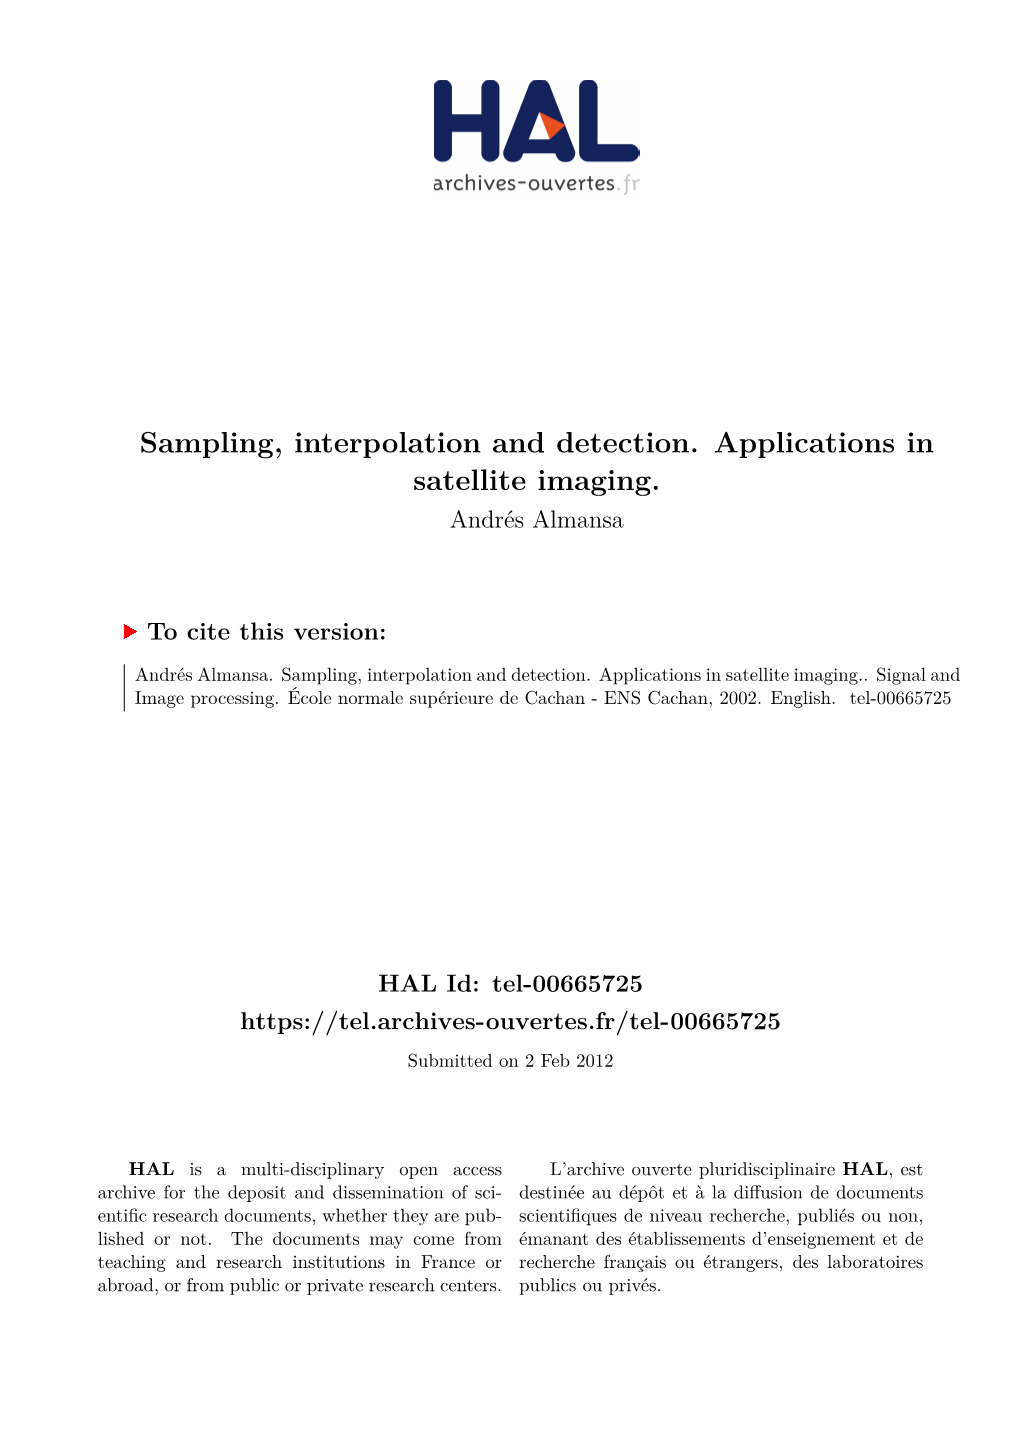 Sampling, Interpolation and Detection. Applications in Satellite Imaging. Andrés Almansa